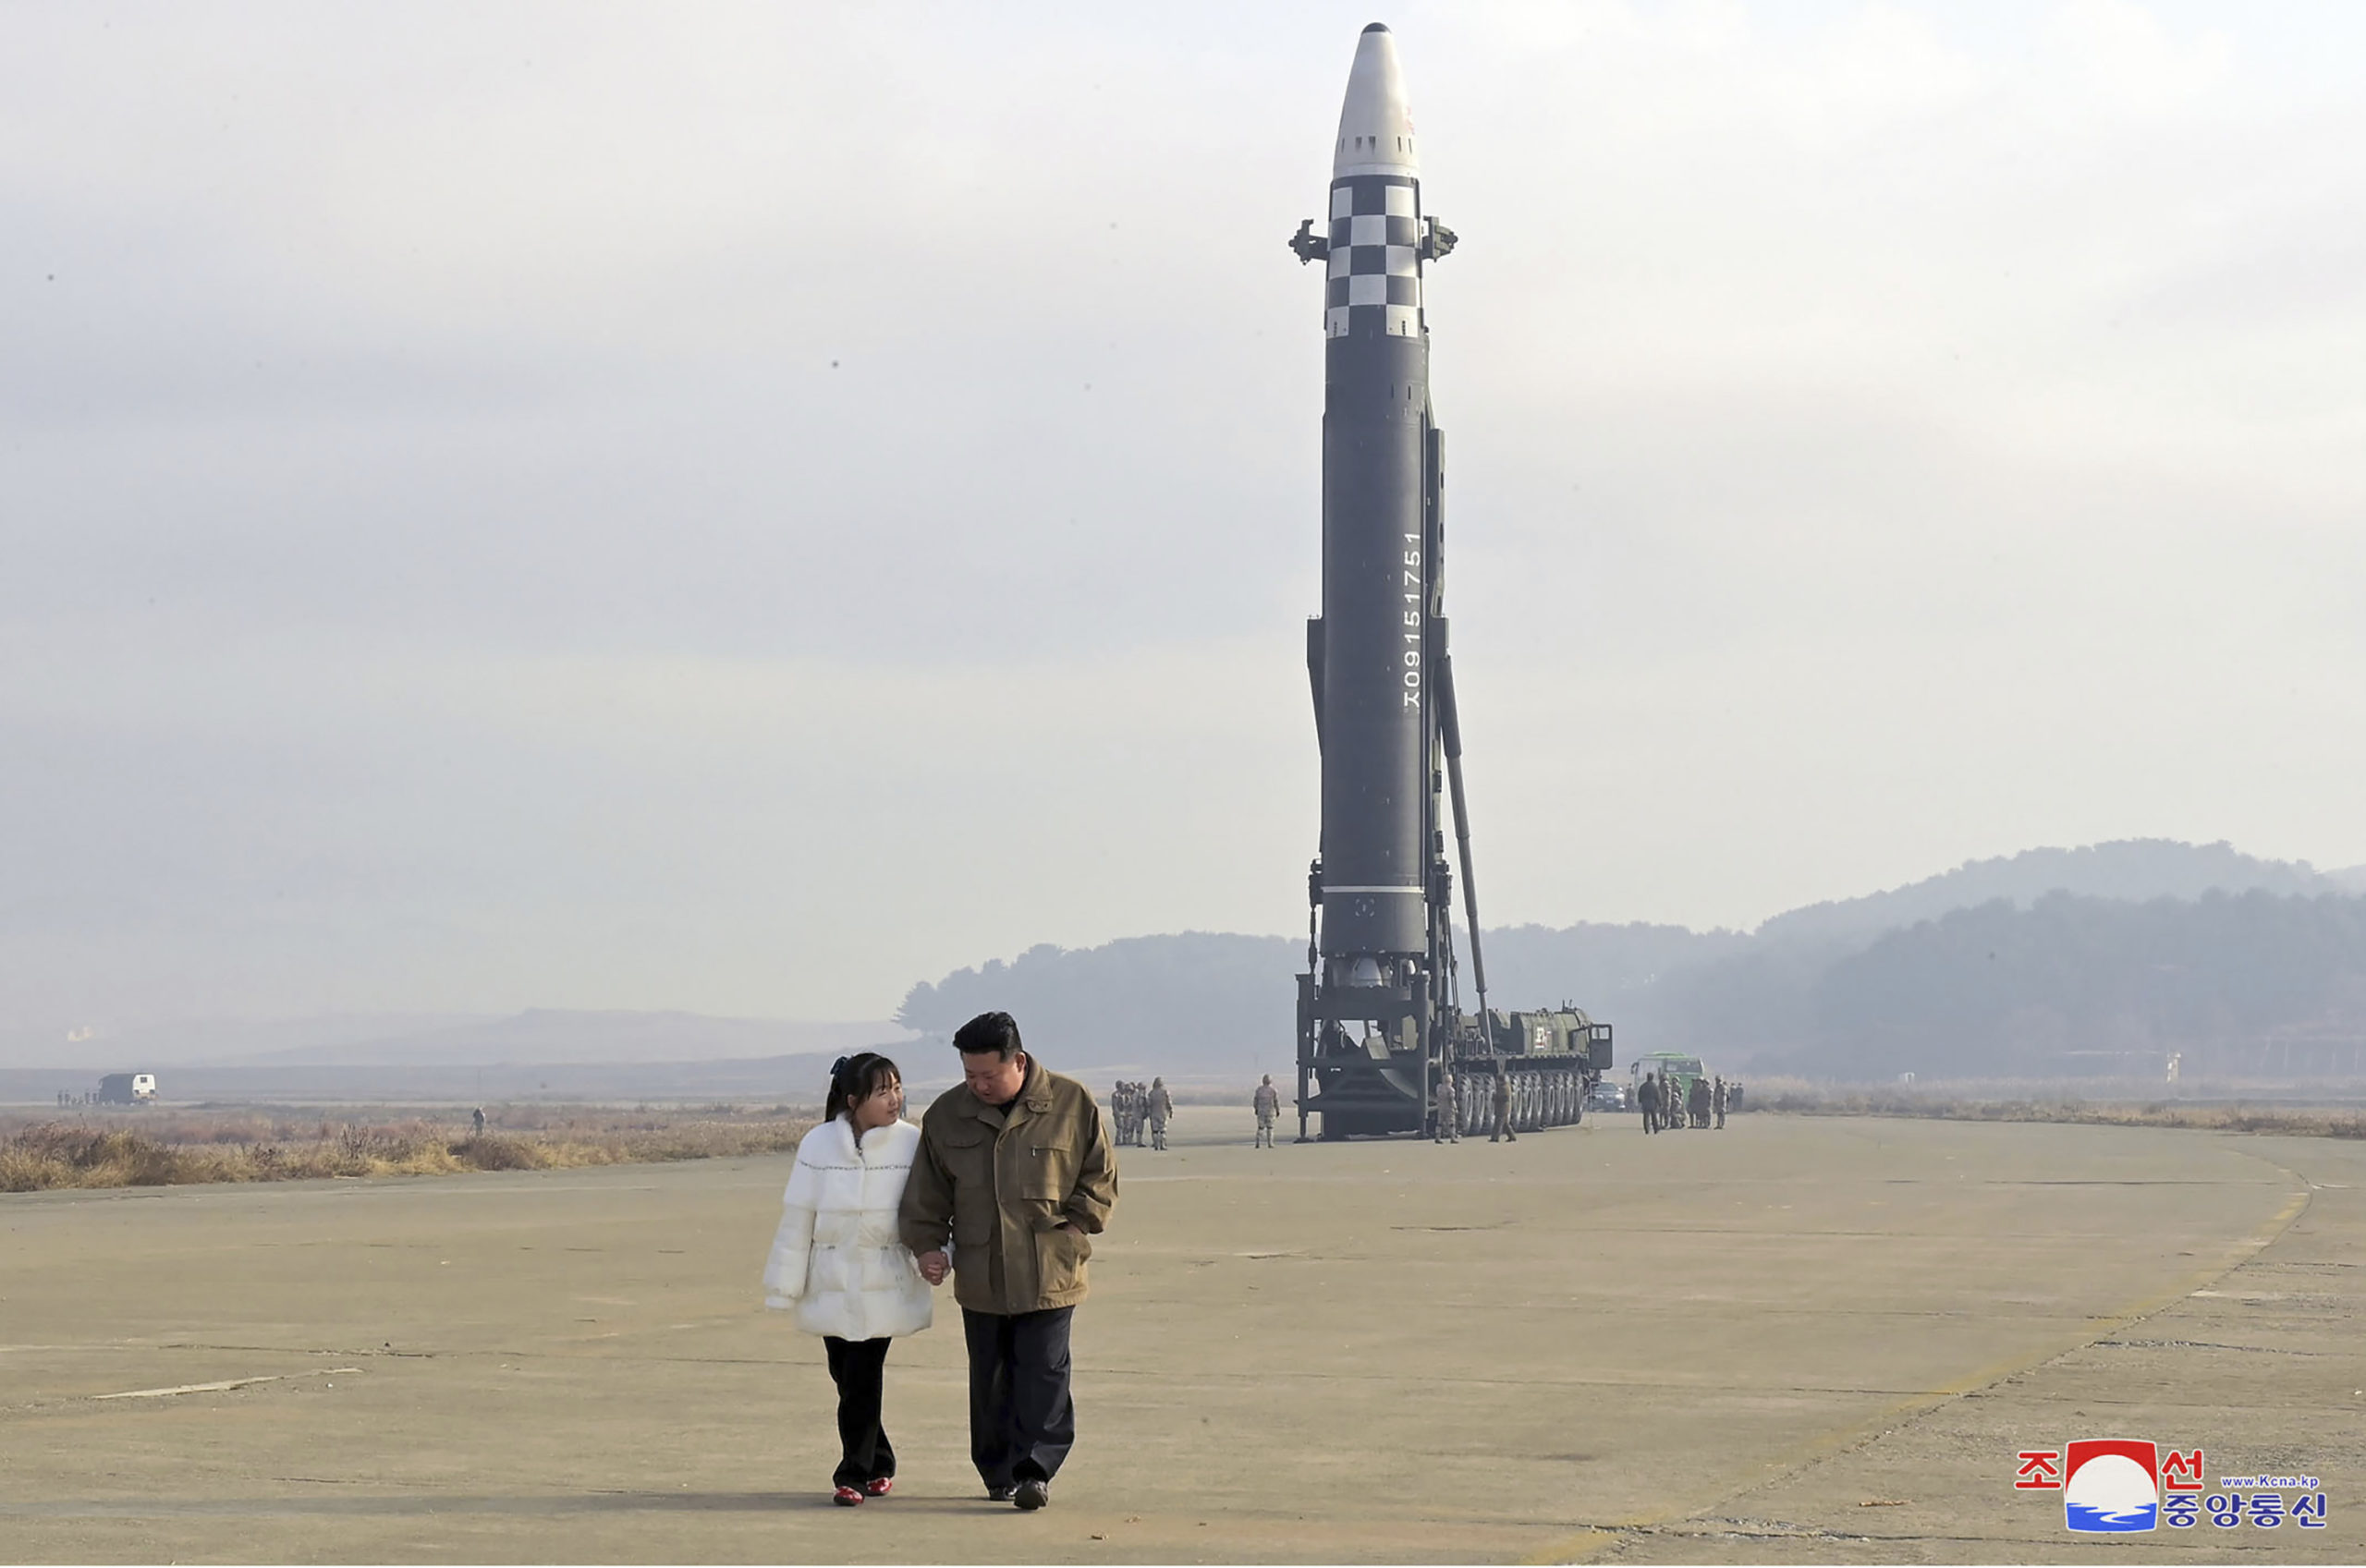 On Friday, North Korea's leader Kim Jong Un, right, was seen at a missile launch site in Pyongyang, North Korea, with his daughter, left.